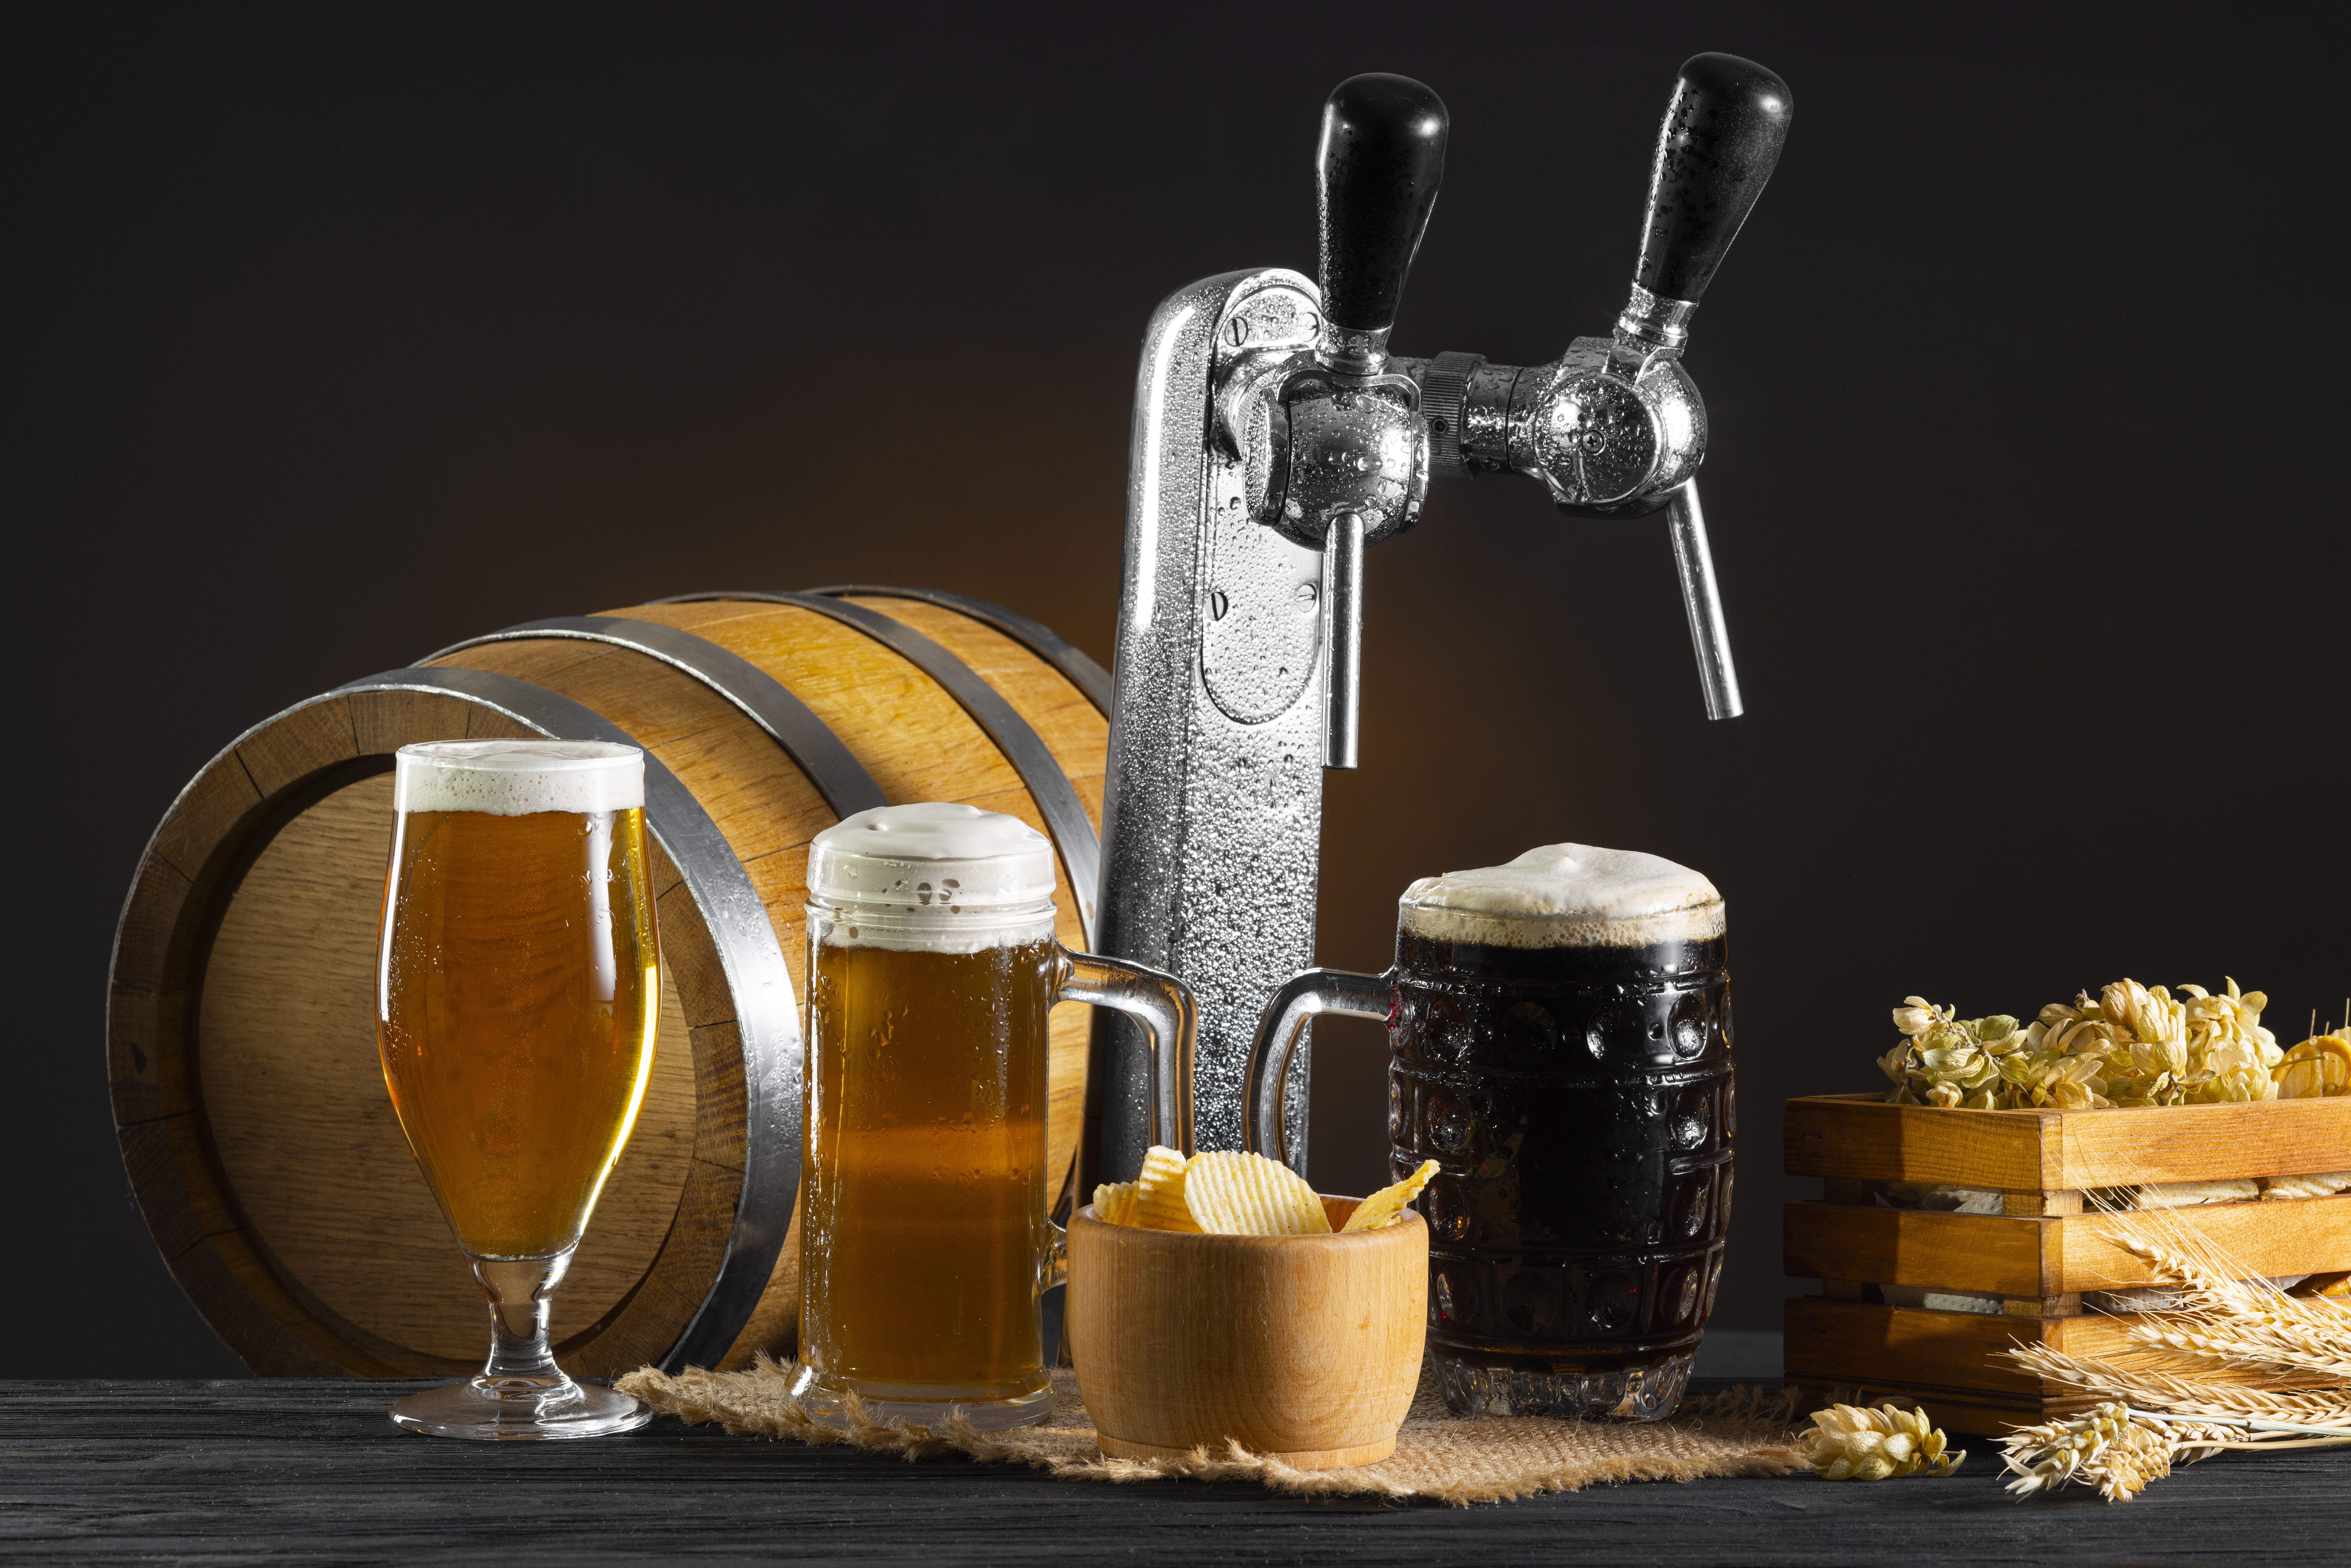 A table with beer glasses and barrels on it